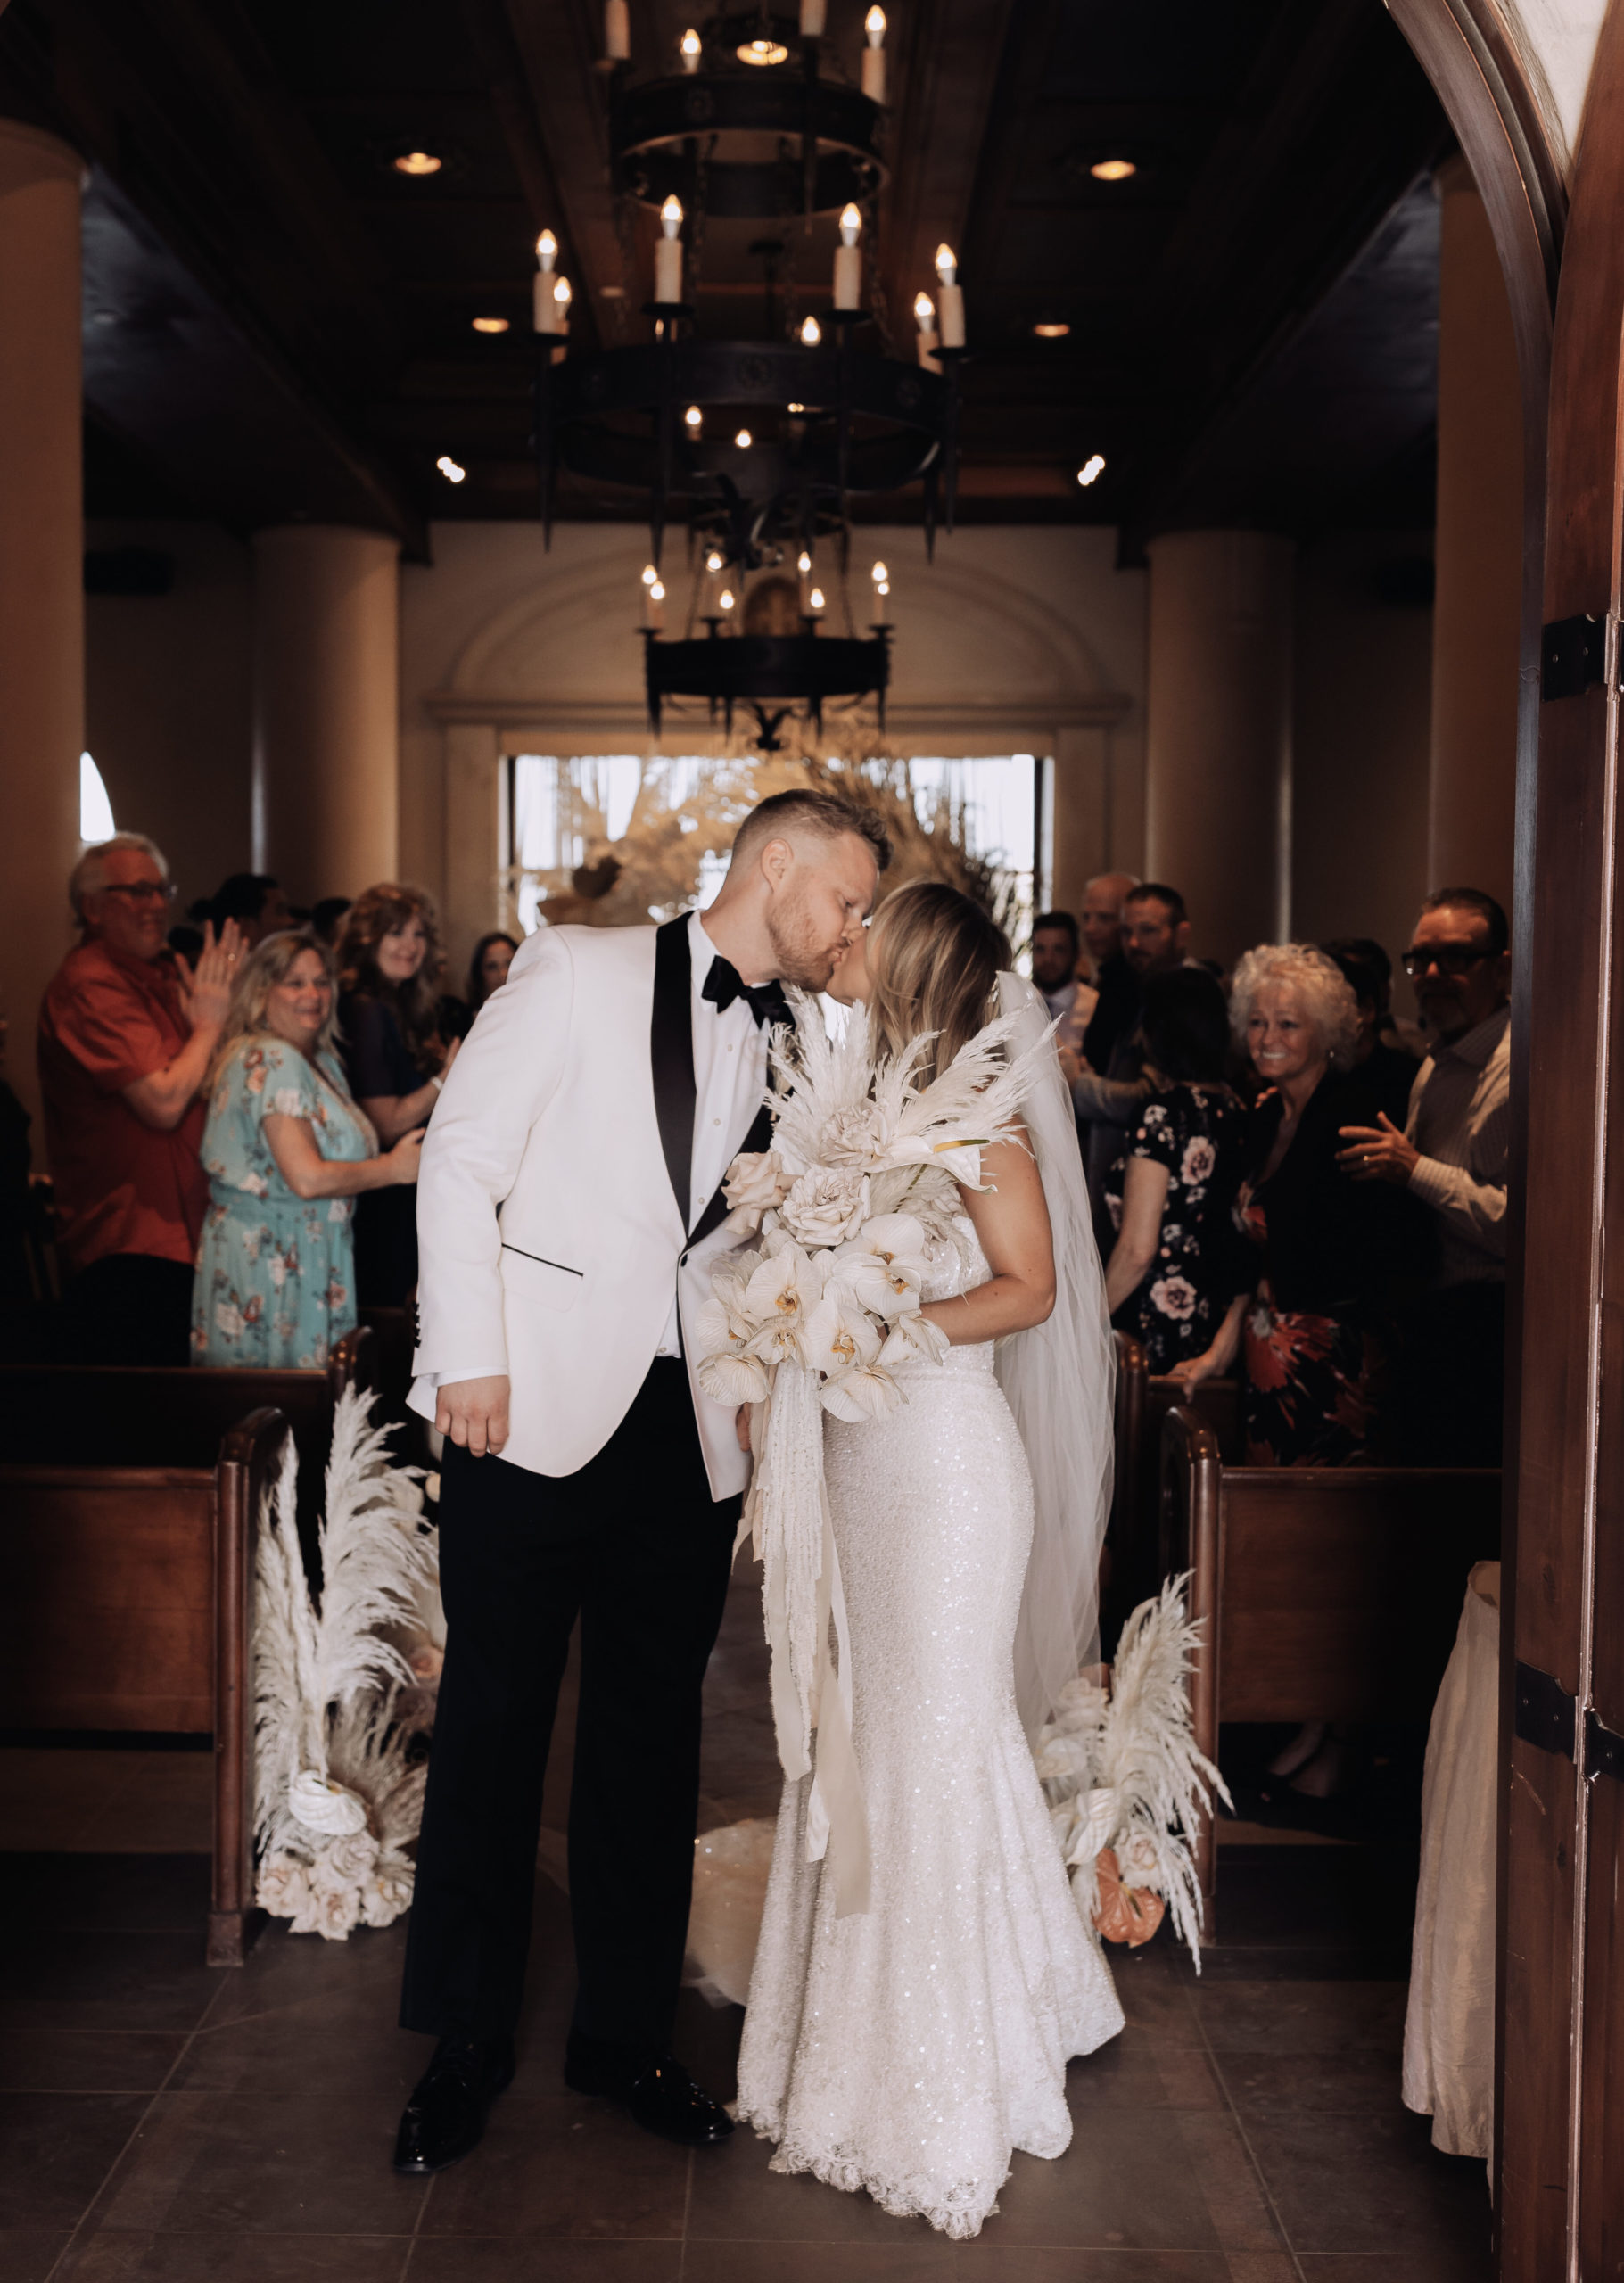 Lake Las Vegas Meets Modern Boho Bride. Newlyweds kiss at the end of the aisle in the doorway of the chapel